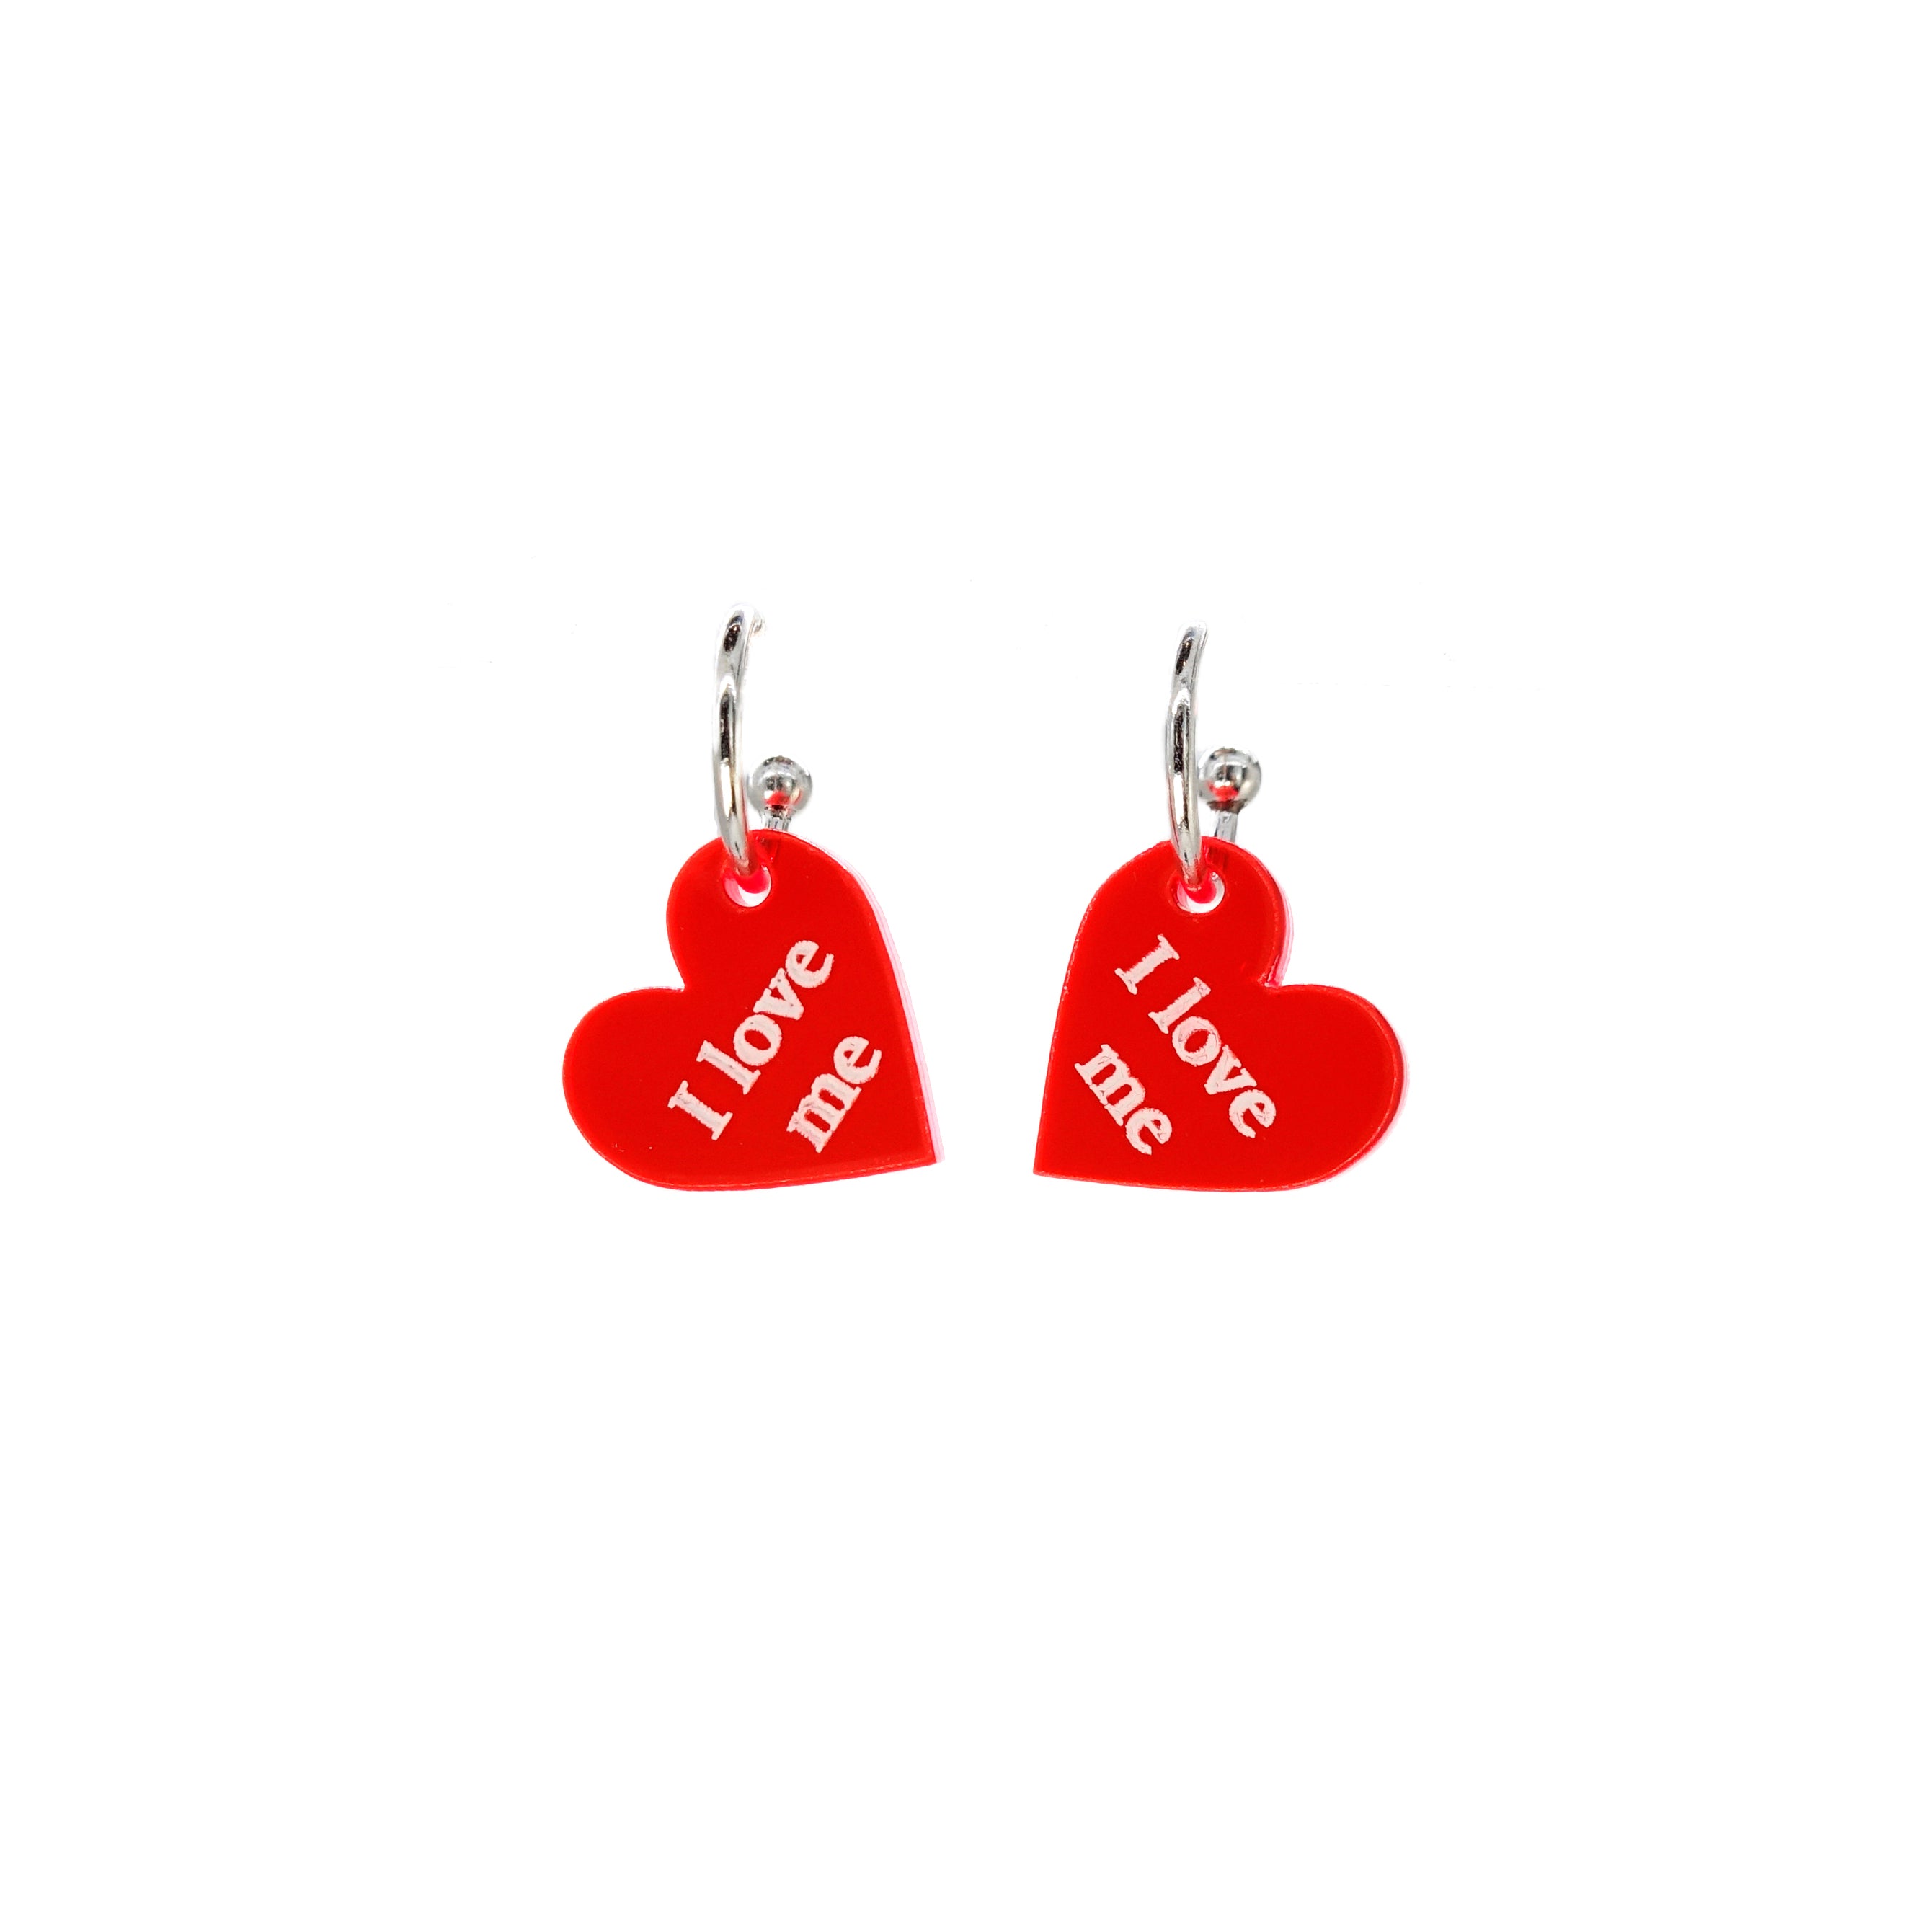 Small I Love Me etched heart earrings in transparent hot red on sterling silver plated hoops, shown against a white background. 